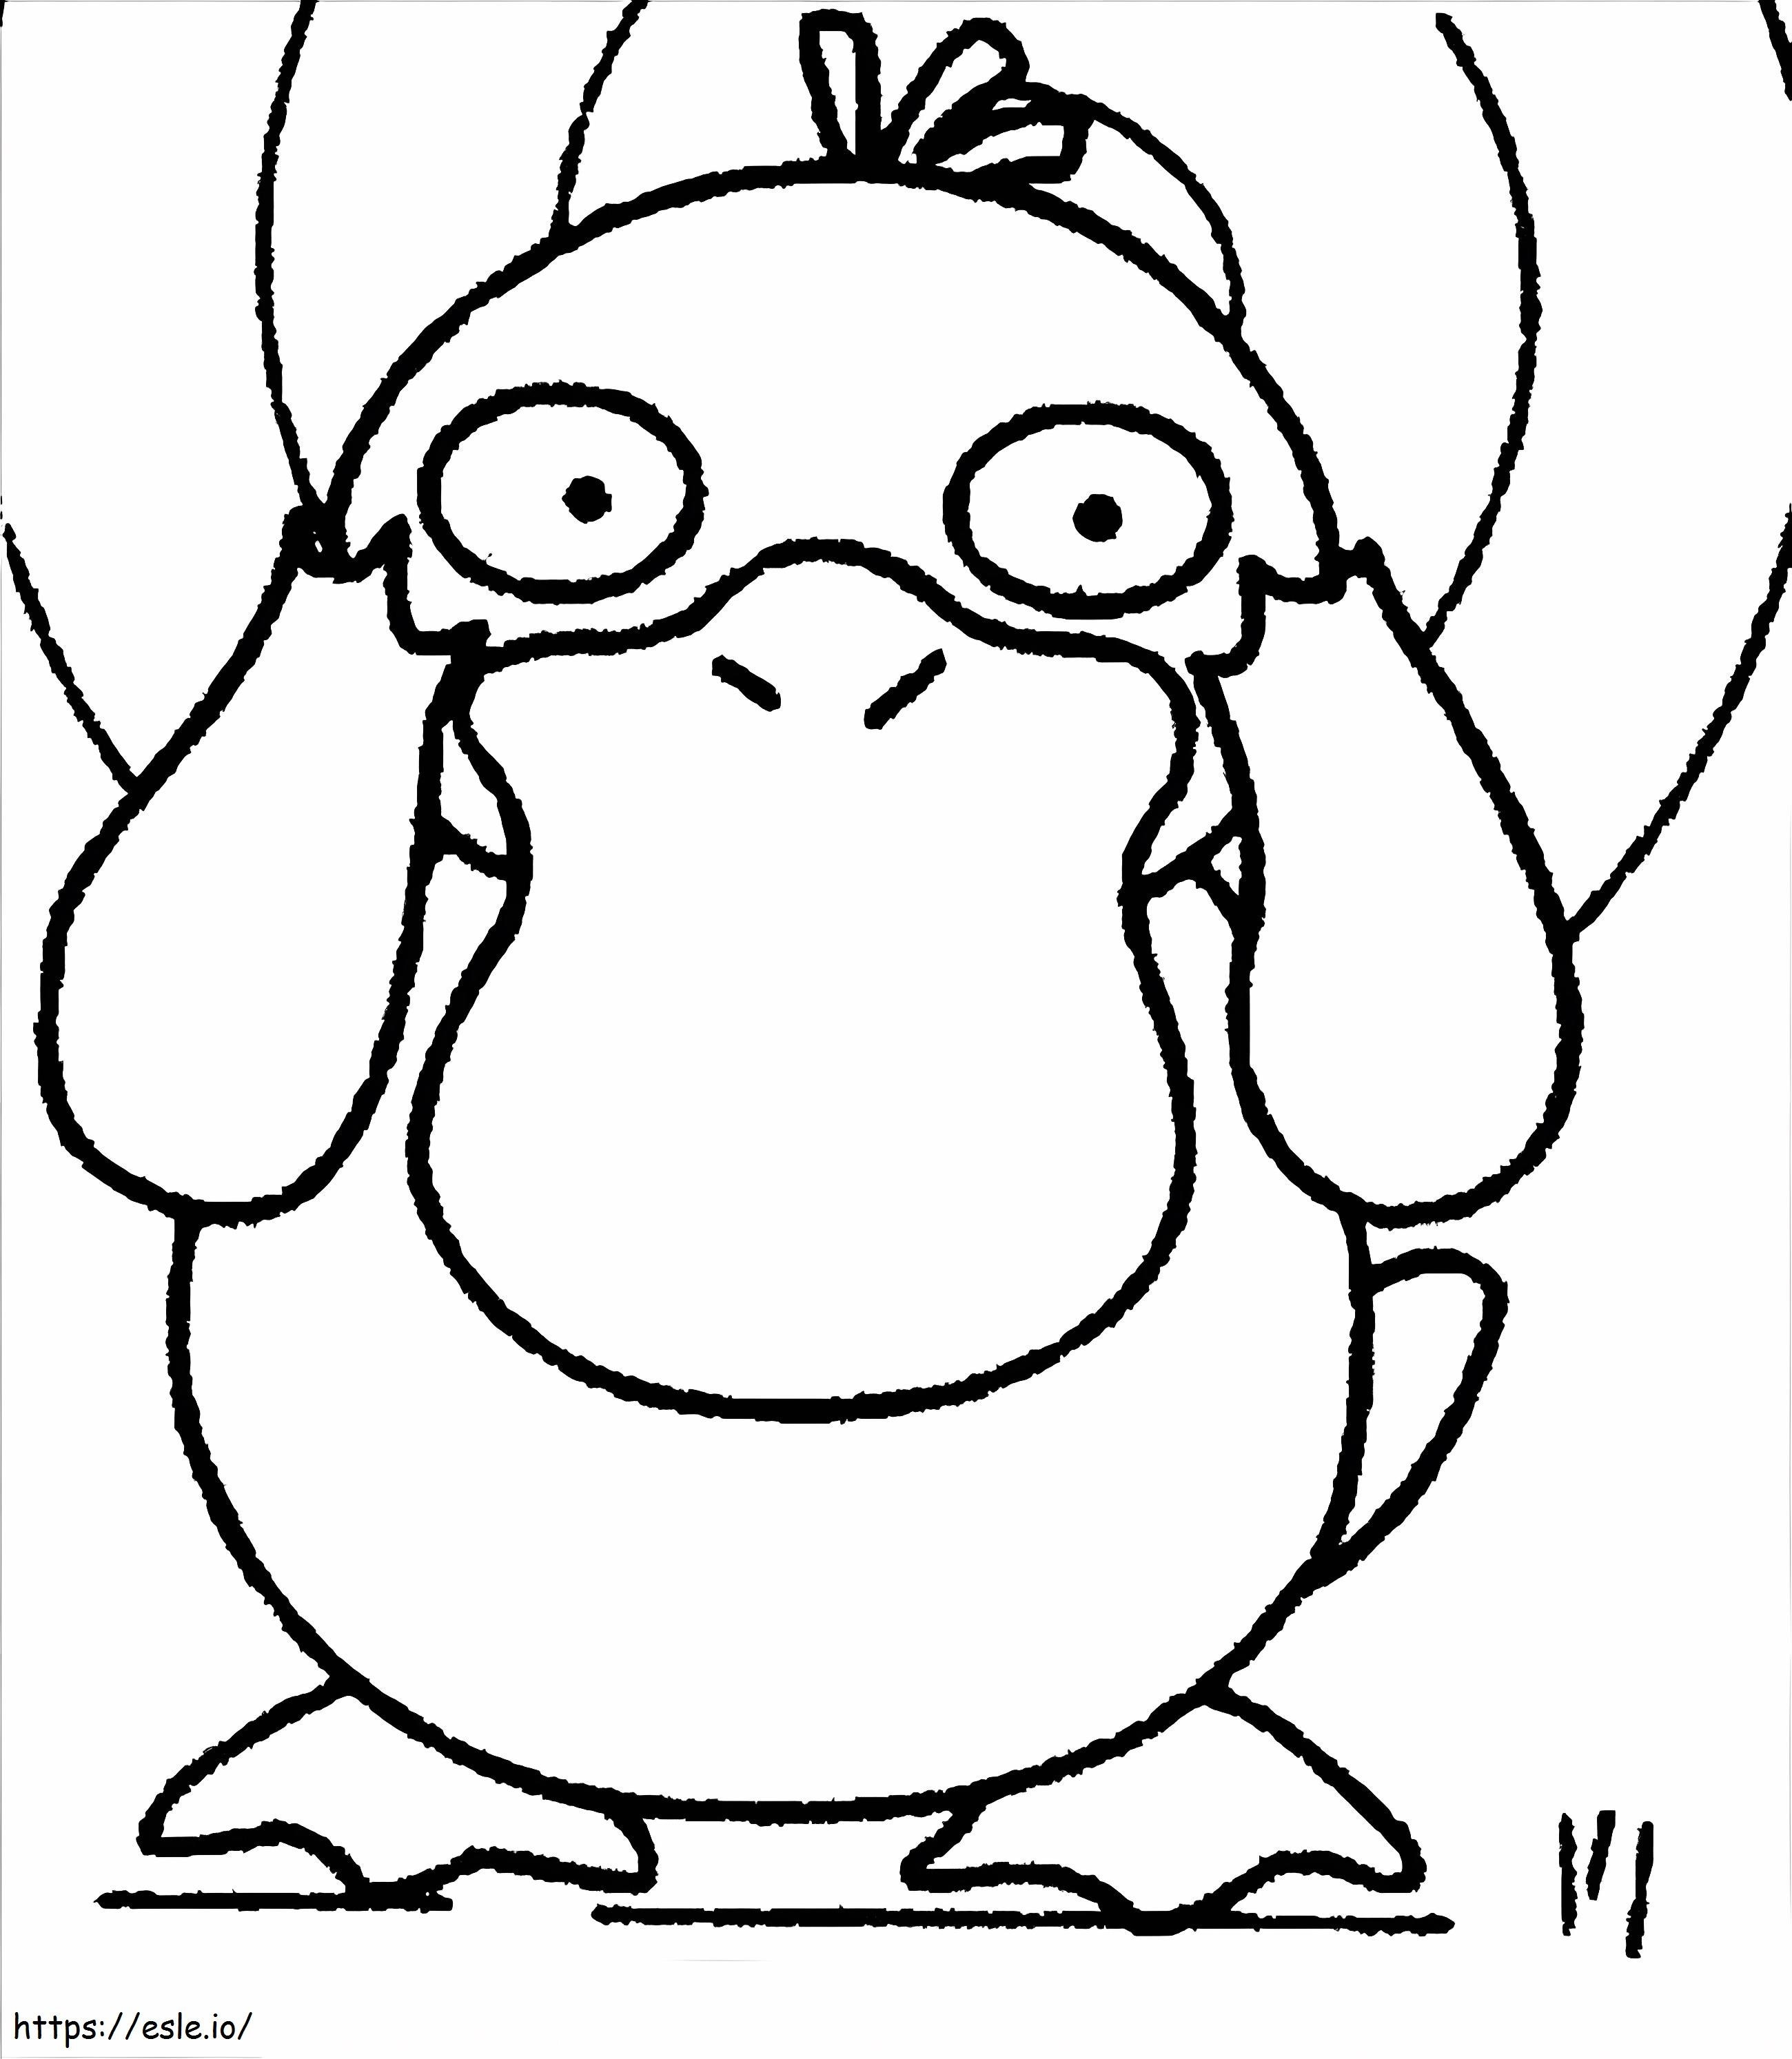 Psyduck 6 coloring page